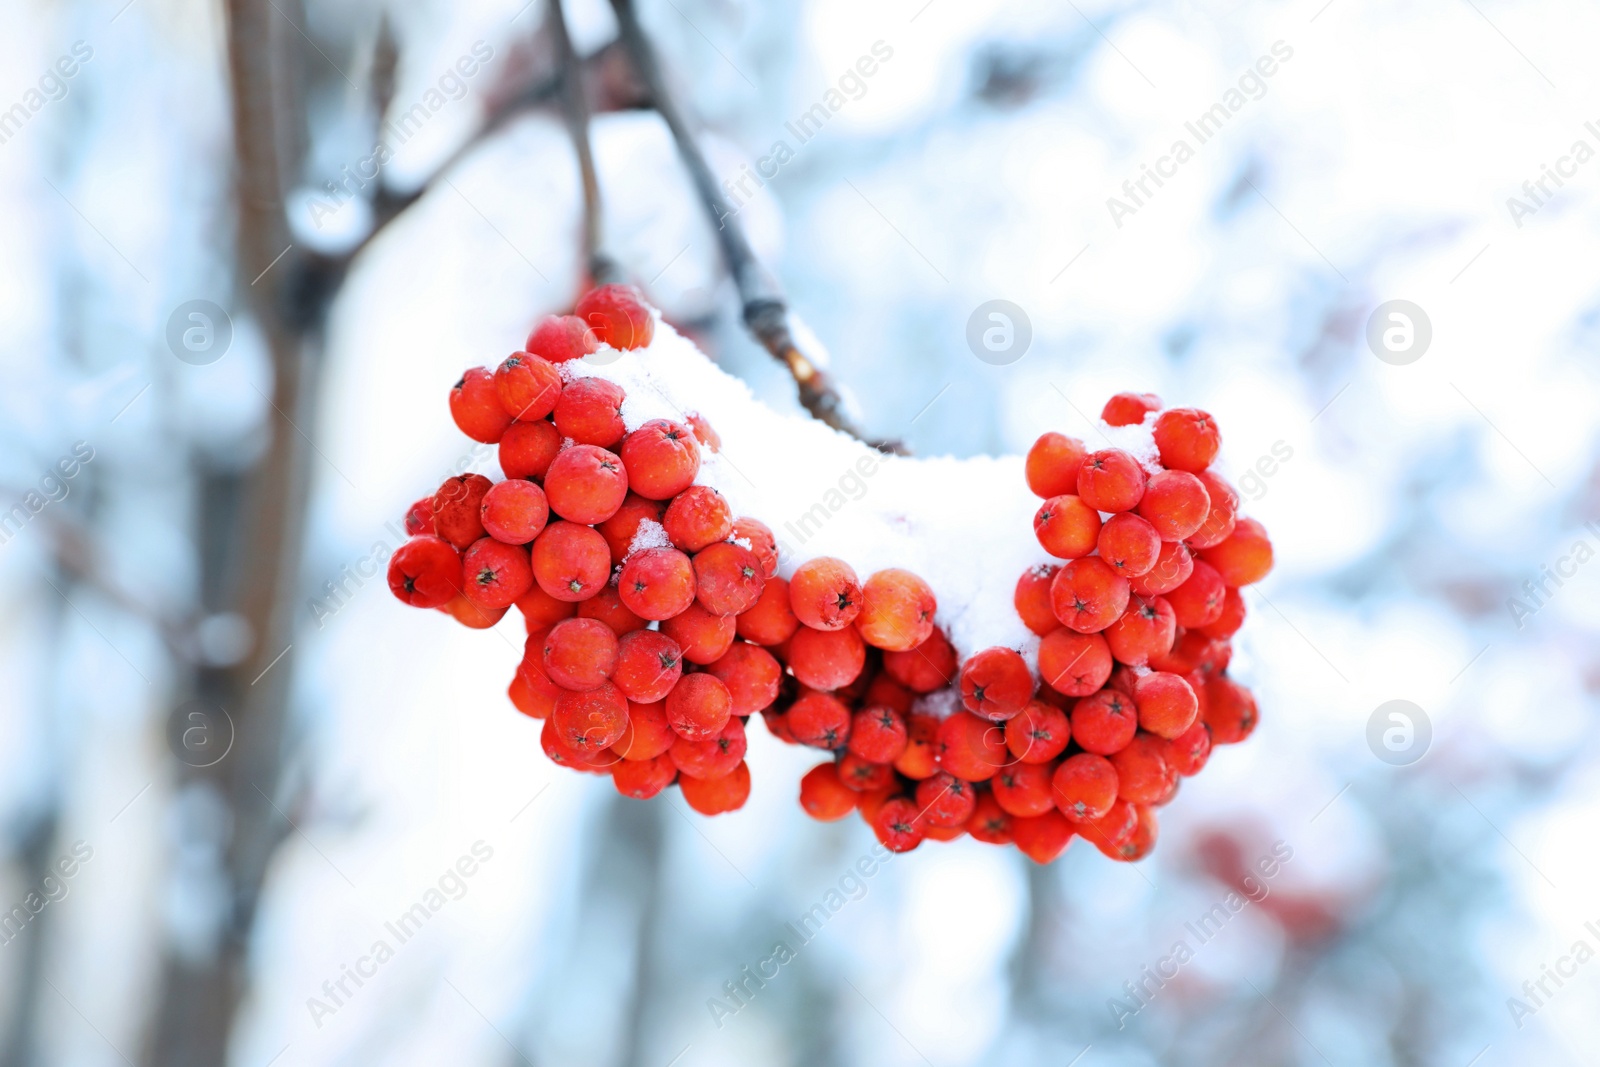 Image of Red rowan berries on tree branch covered with snow outdoors on cold winter day